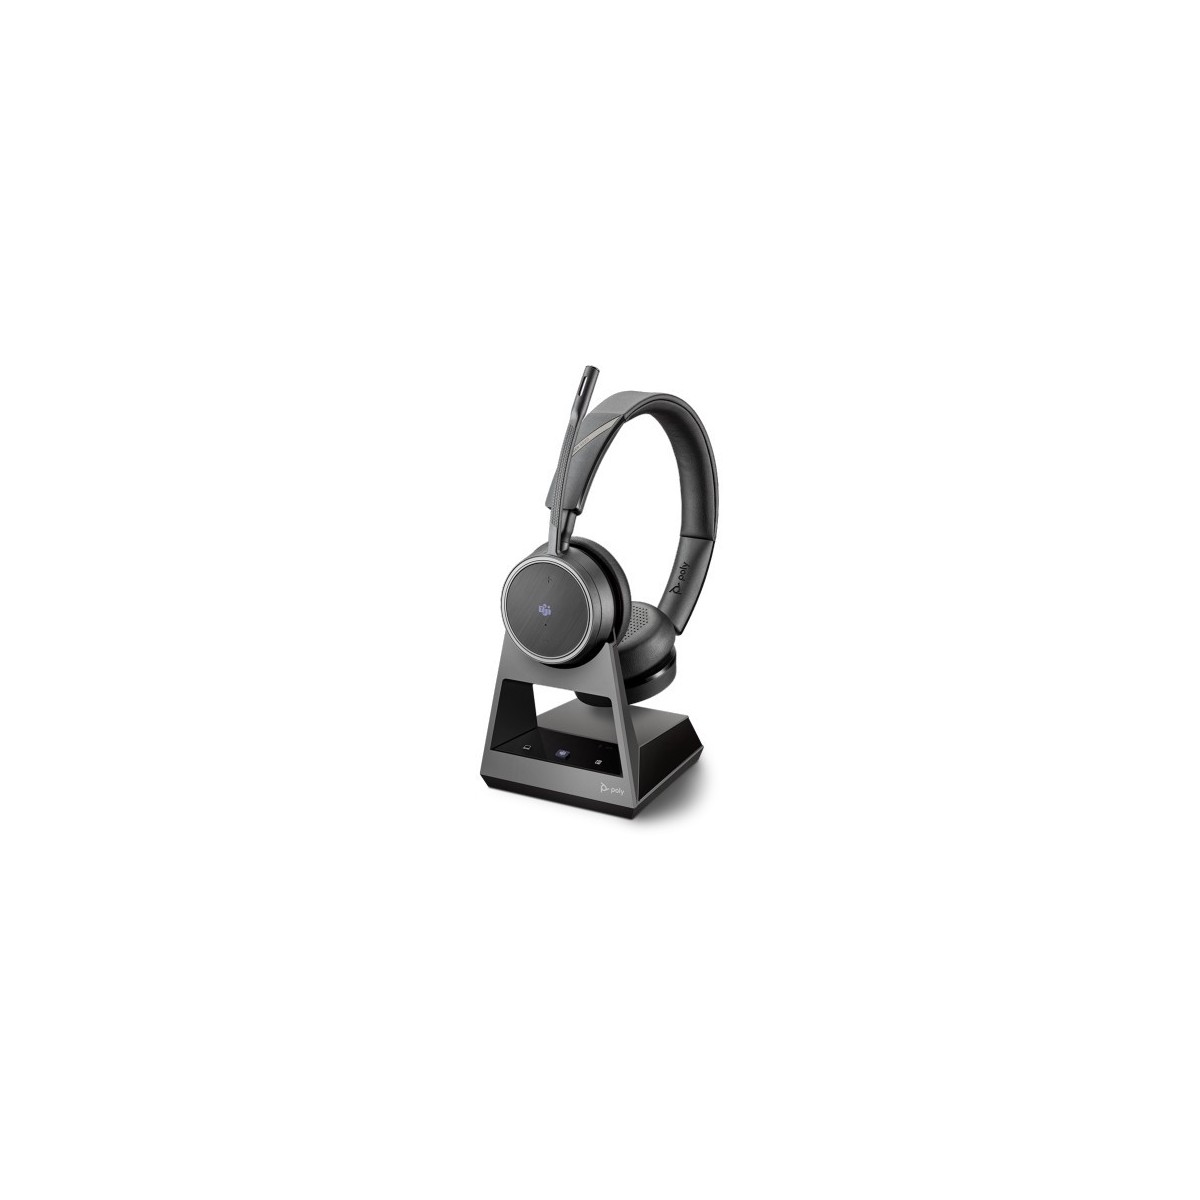 Poly Voyager 4220 Office - Headset - Boom - Head-band - Office/Call center - Black - Binaural